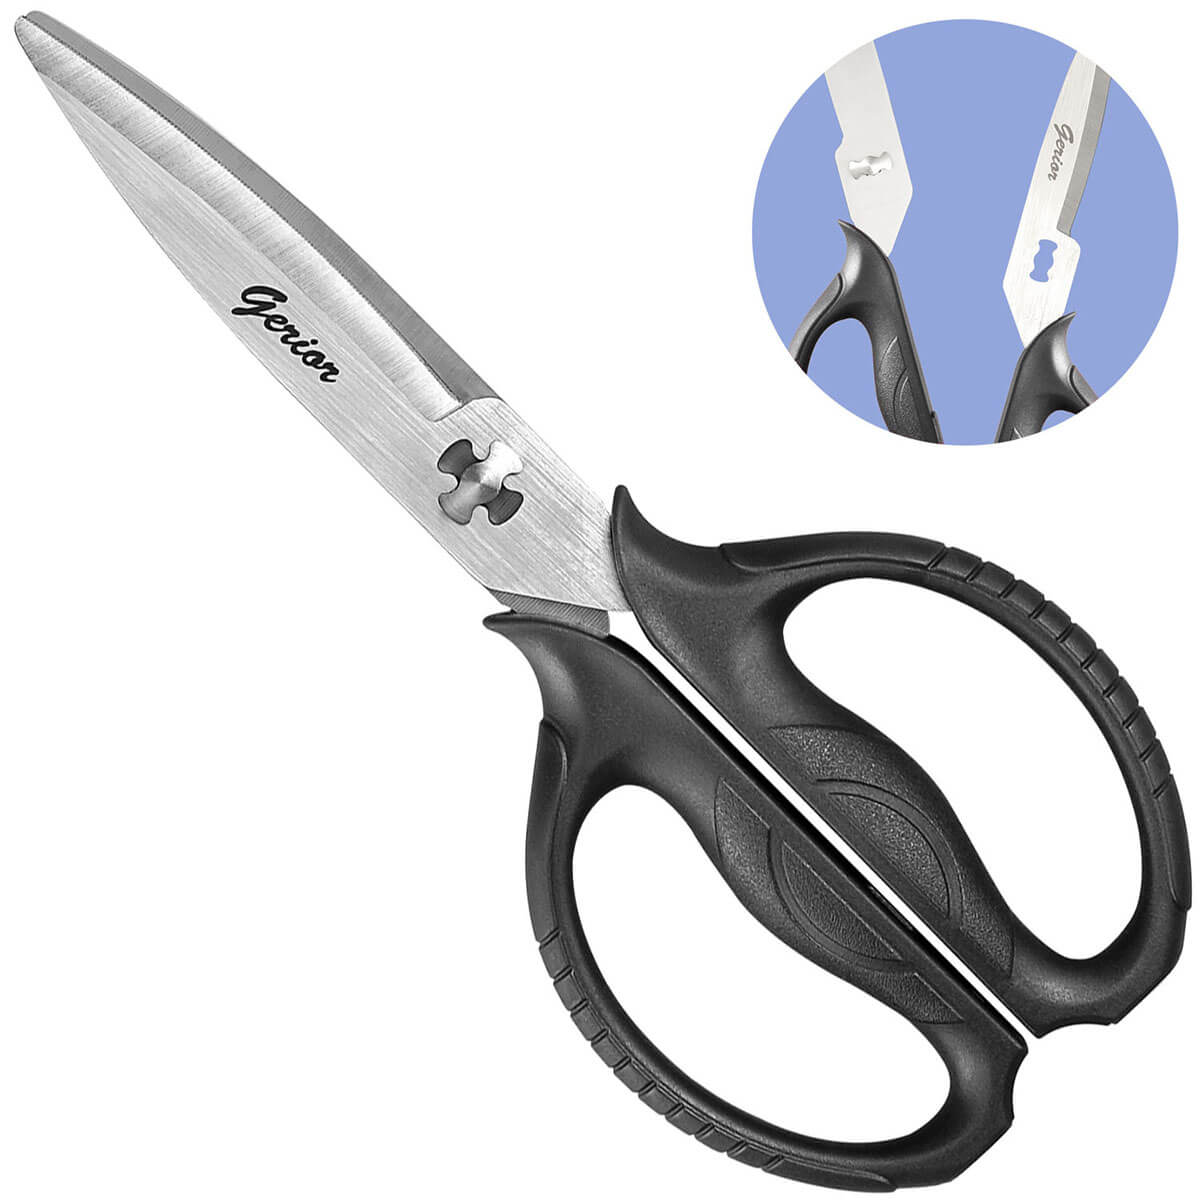 Gerior Heavy Duty Poultry Shears - Kitchen Scissors for Cutting Chicken, Poultry, Game, Meat - Chopping Vegetable - Spring Loaded